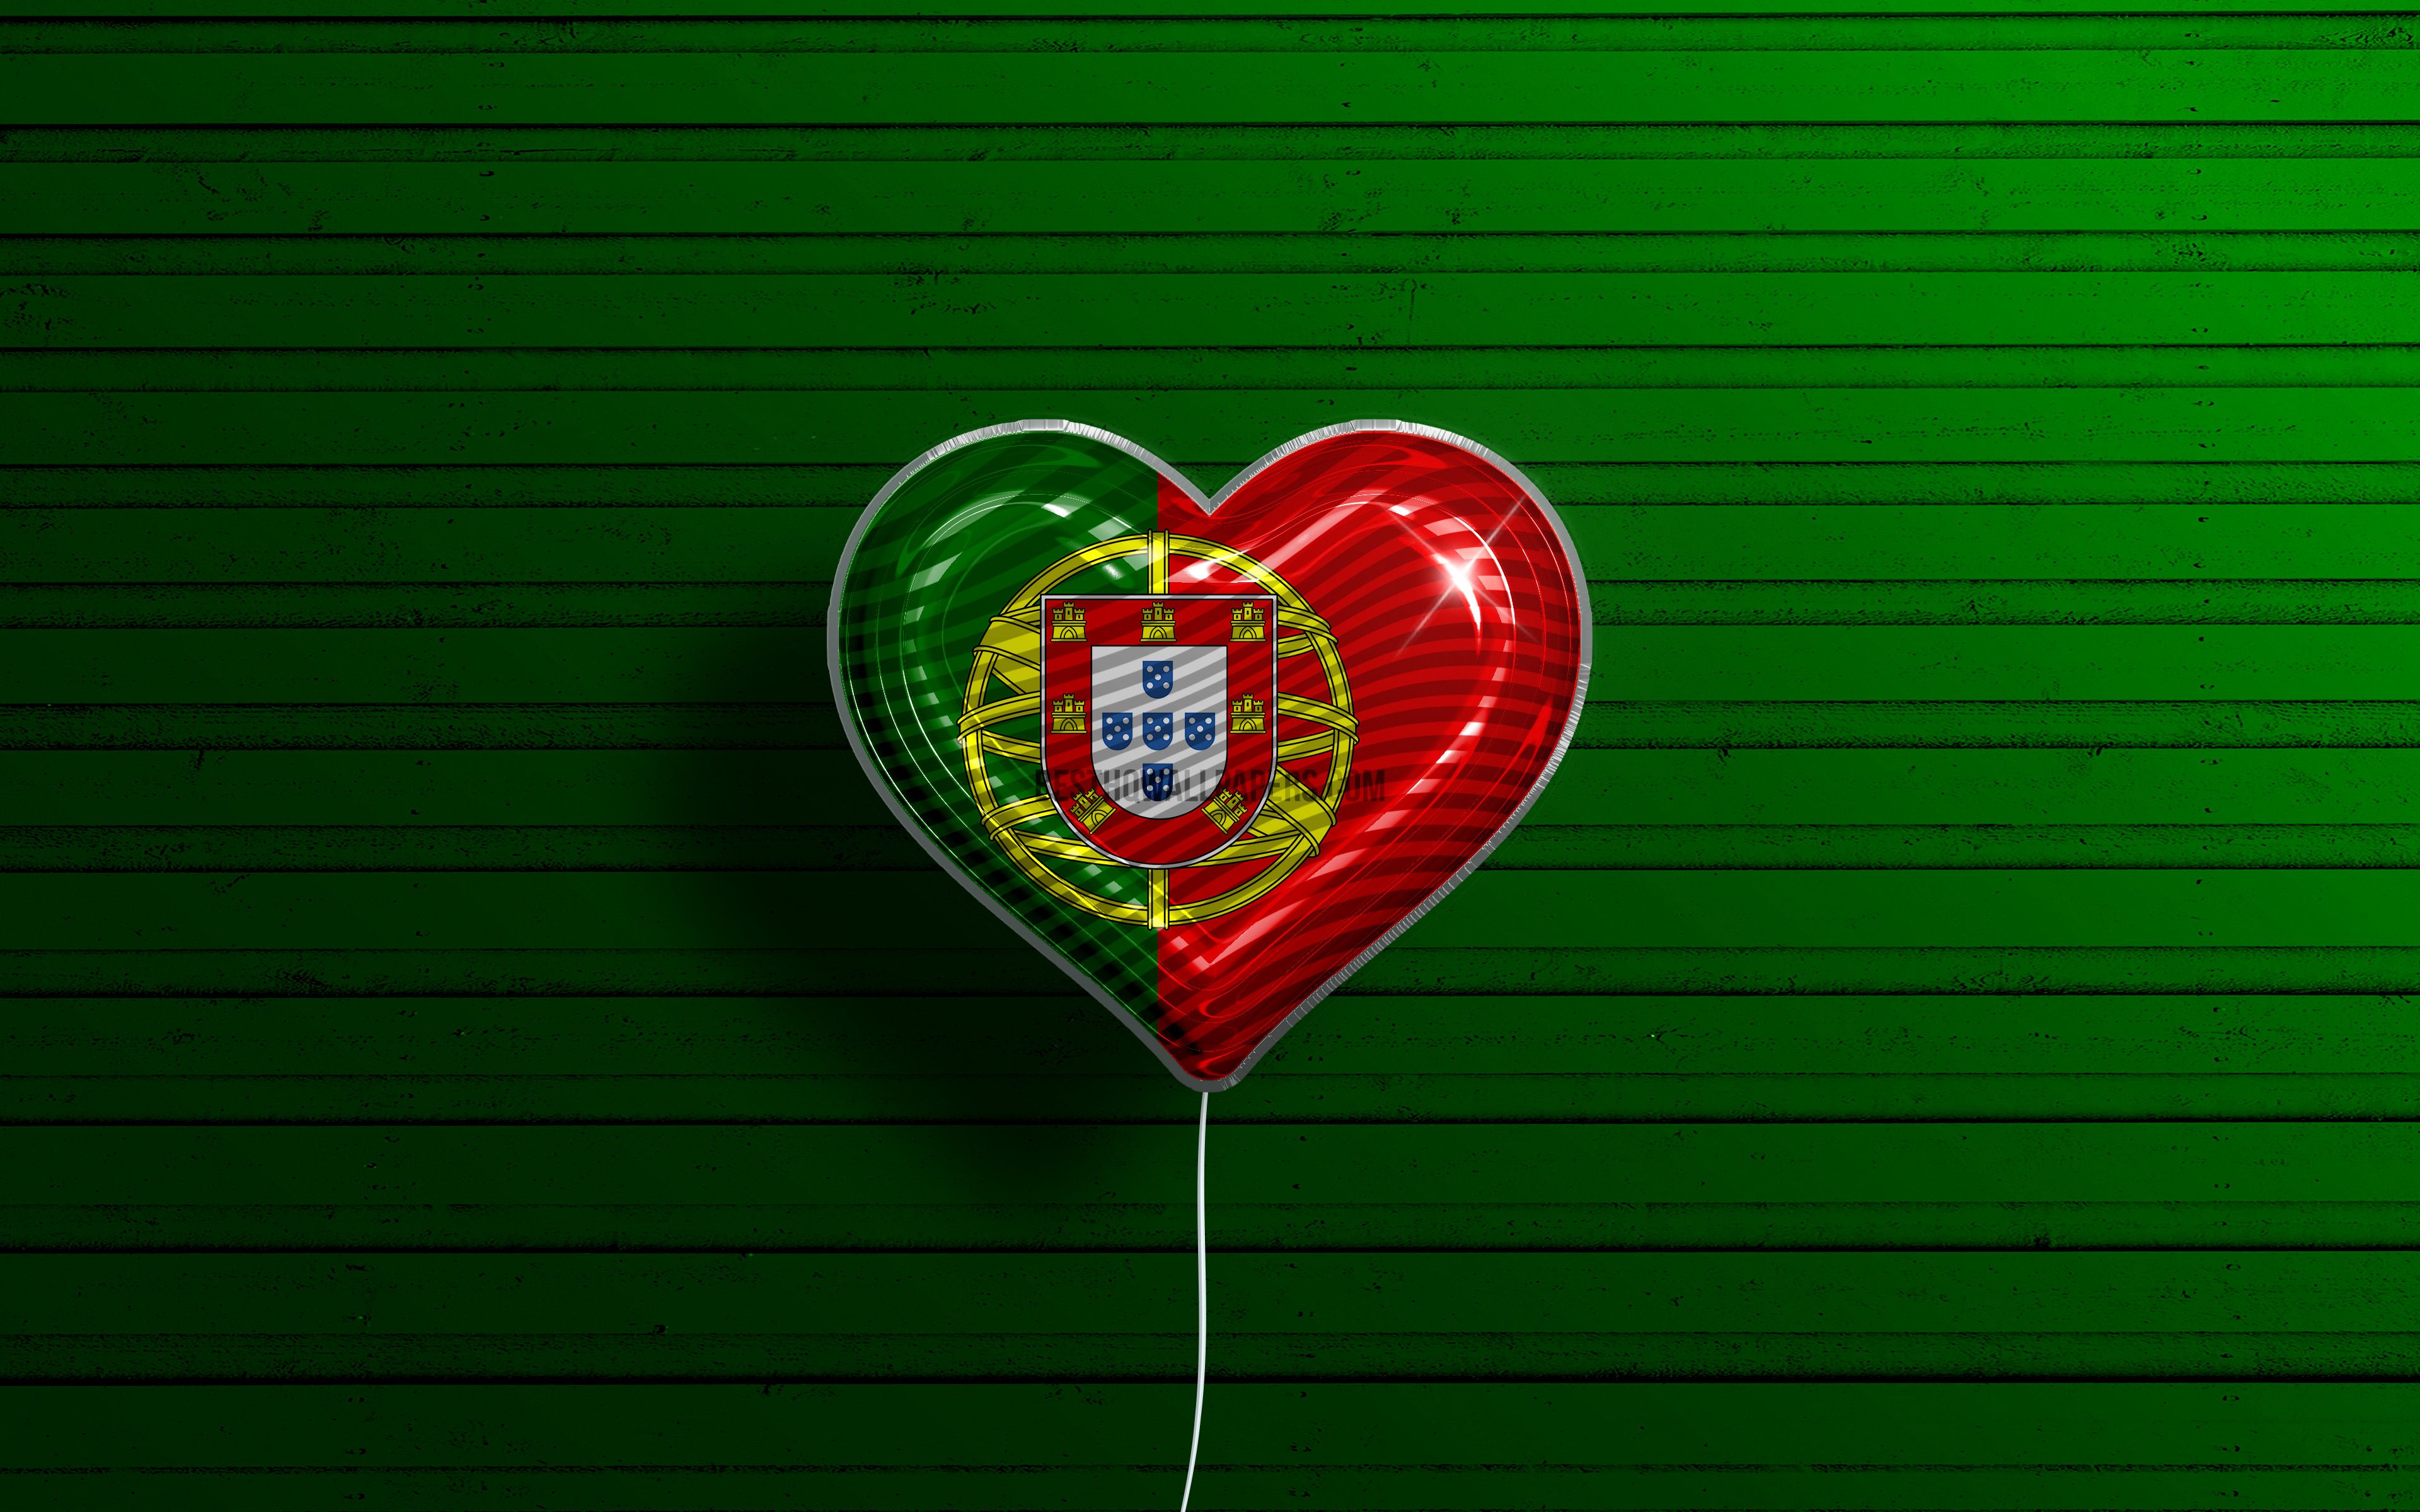 Download wallpaper I Love Portugal, 4k, realistic balloons, green wooden background, Portuguese flag heart, Europe, favorite countries, flag of Portugal, balloon with flag, Portuguese flag, Portugal, Love Portugal for desktop with resolution